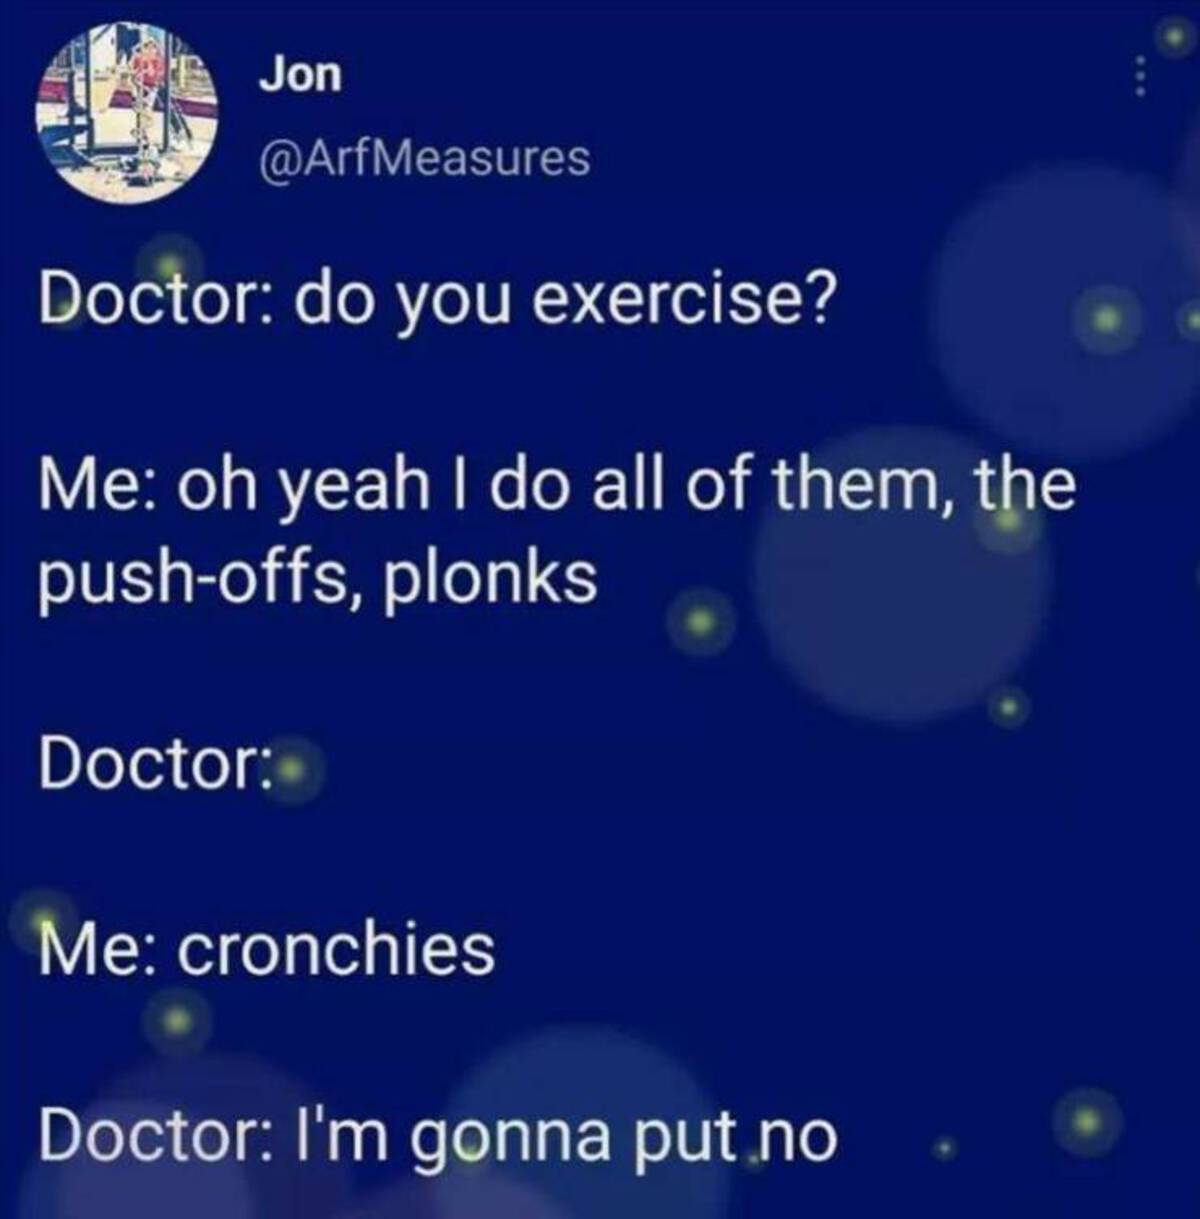 screenshot - Jon Doctor do you exercise? Me oh yeah I do all of them, the pushoffs, plonks Doctor Me cronchies Doctor I'm gonna put no